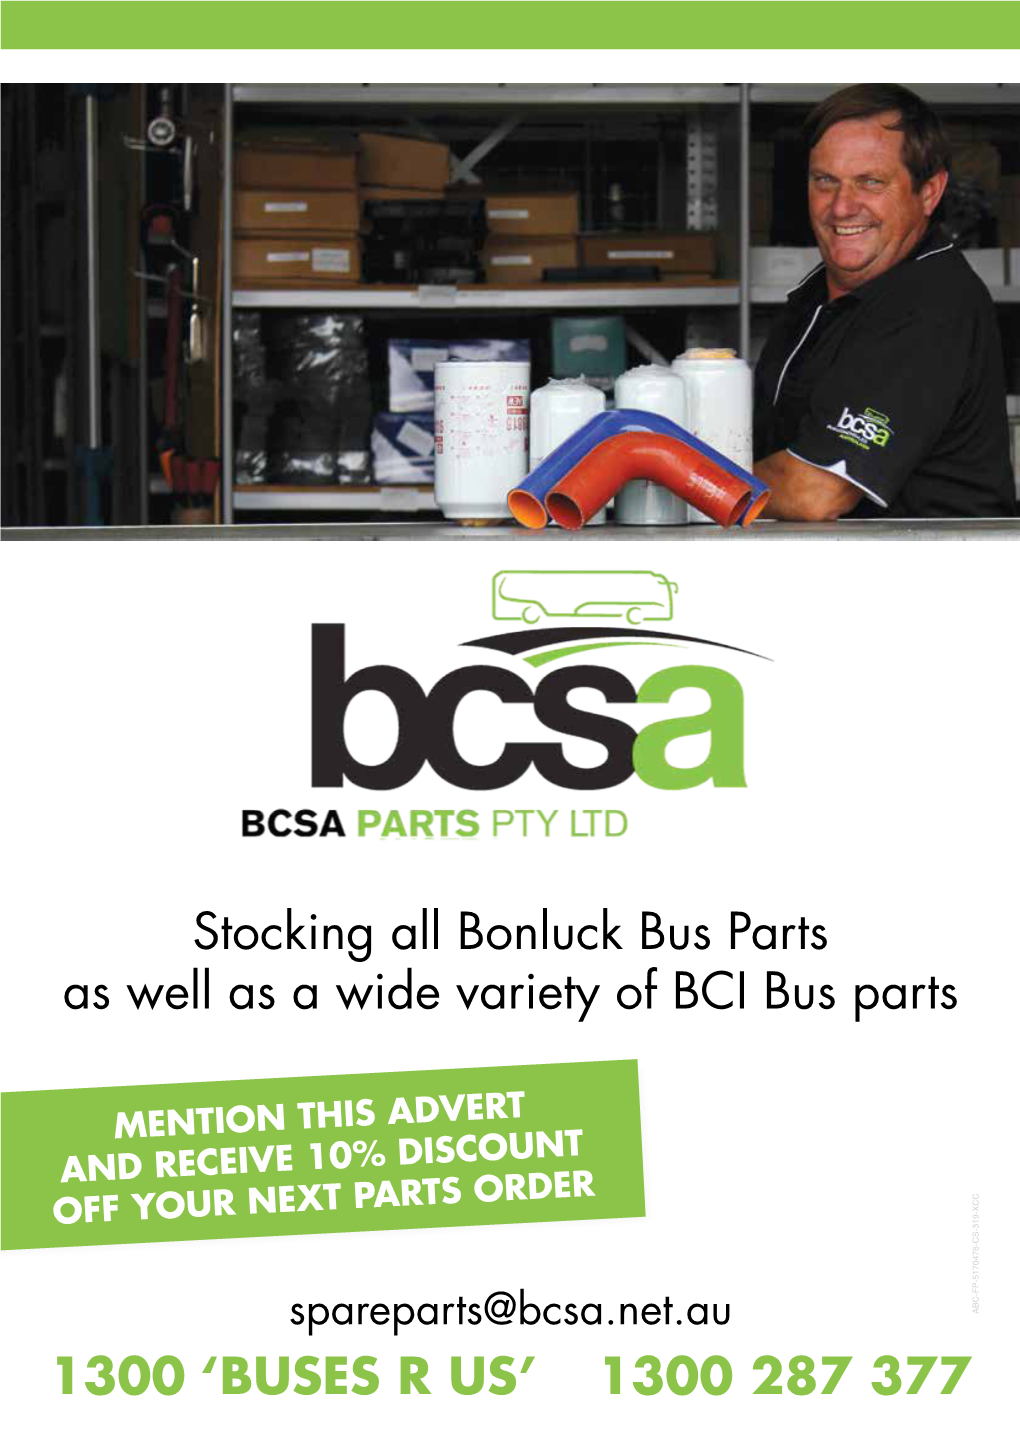 Stocking All Bonluck Bus Parts As Well As a Wide Variety of BCI Bus Parts